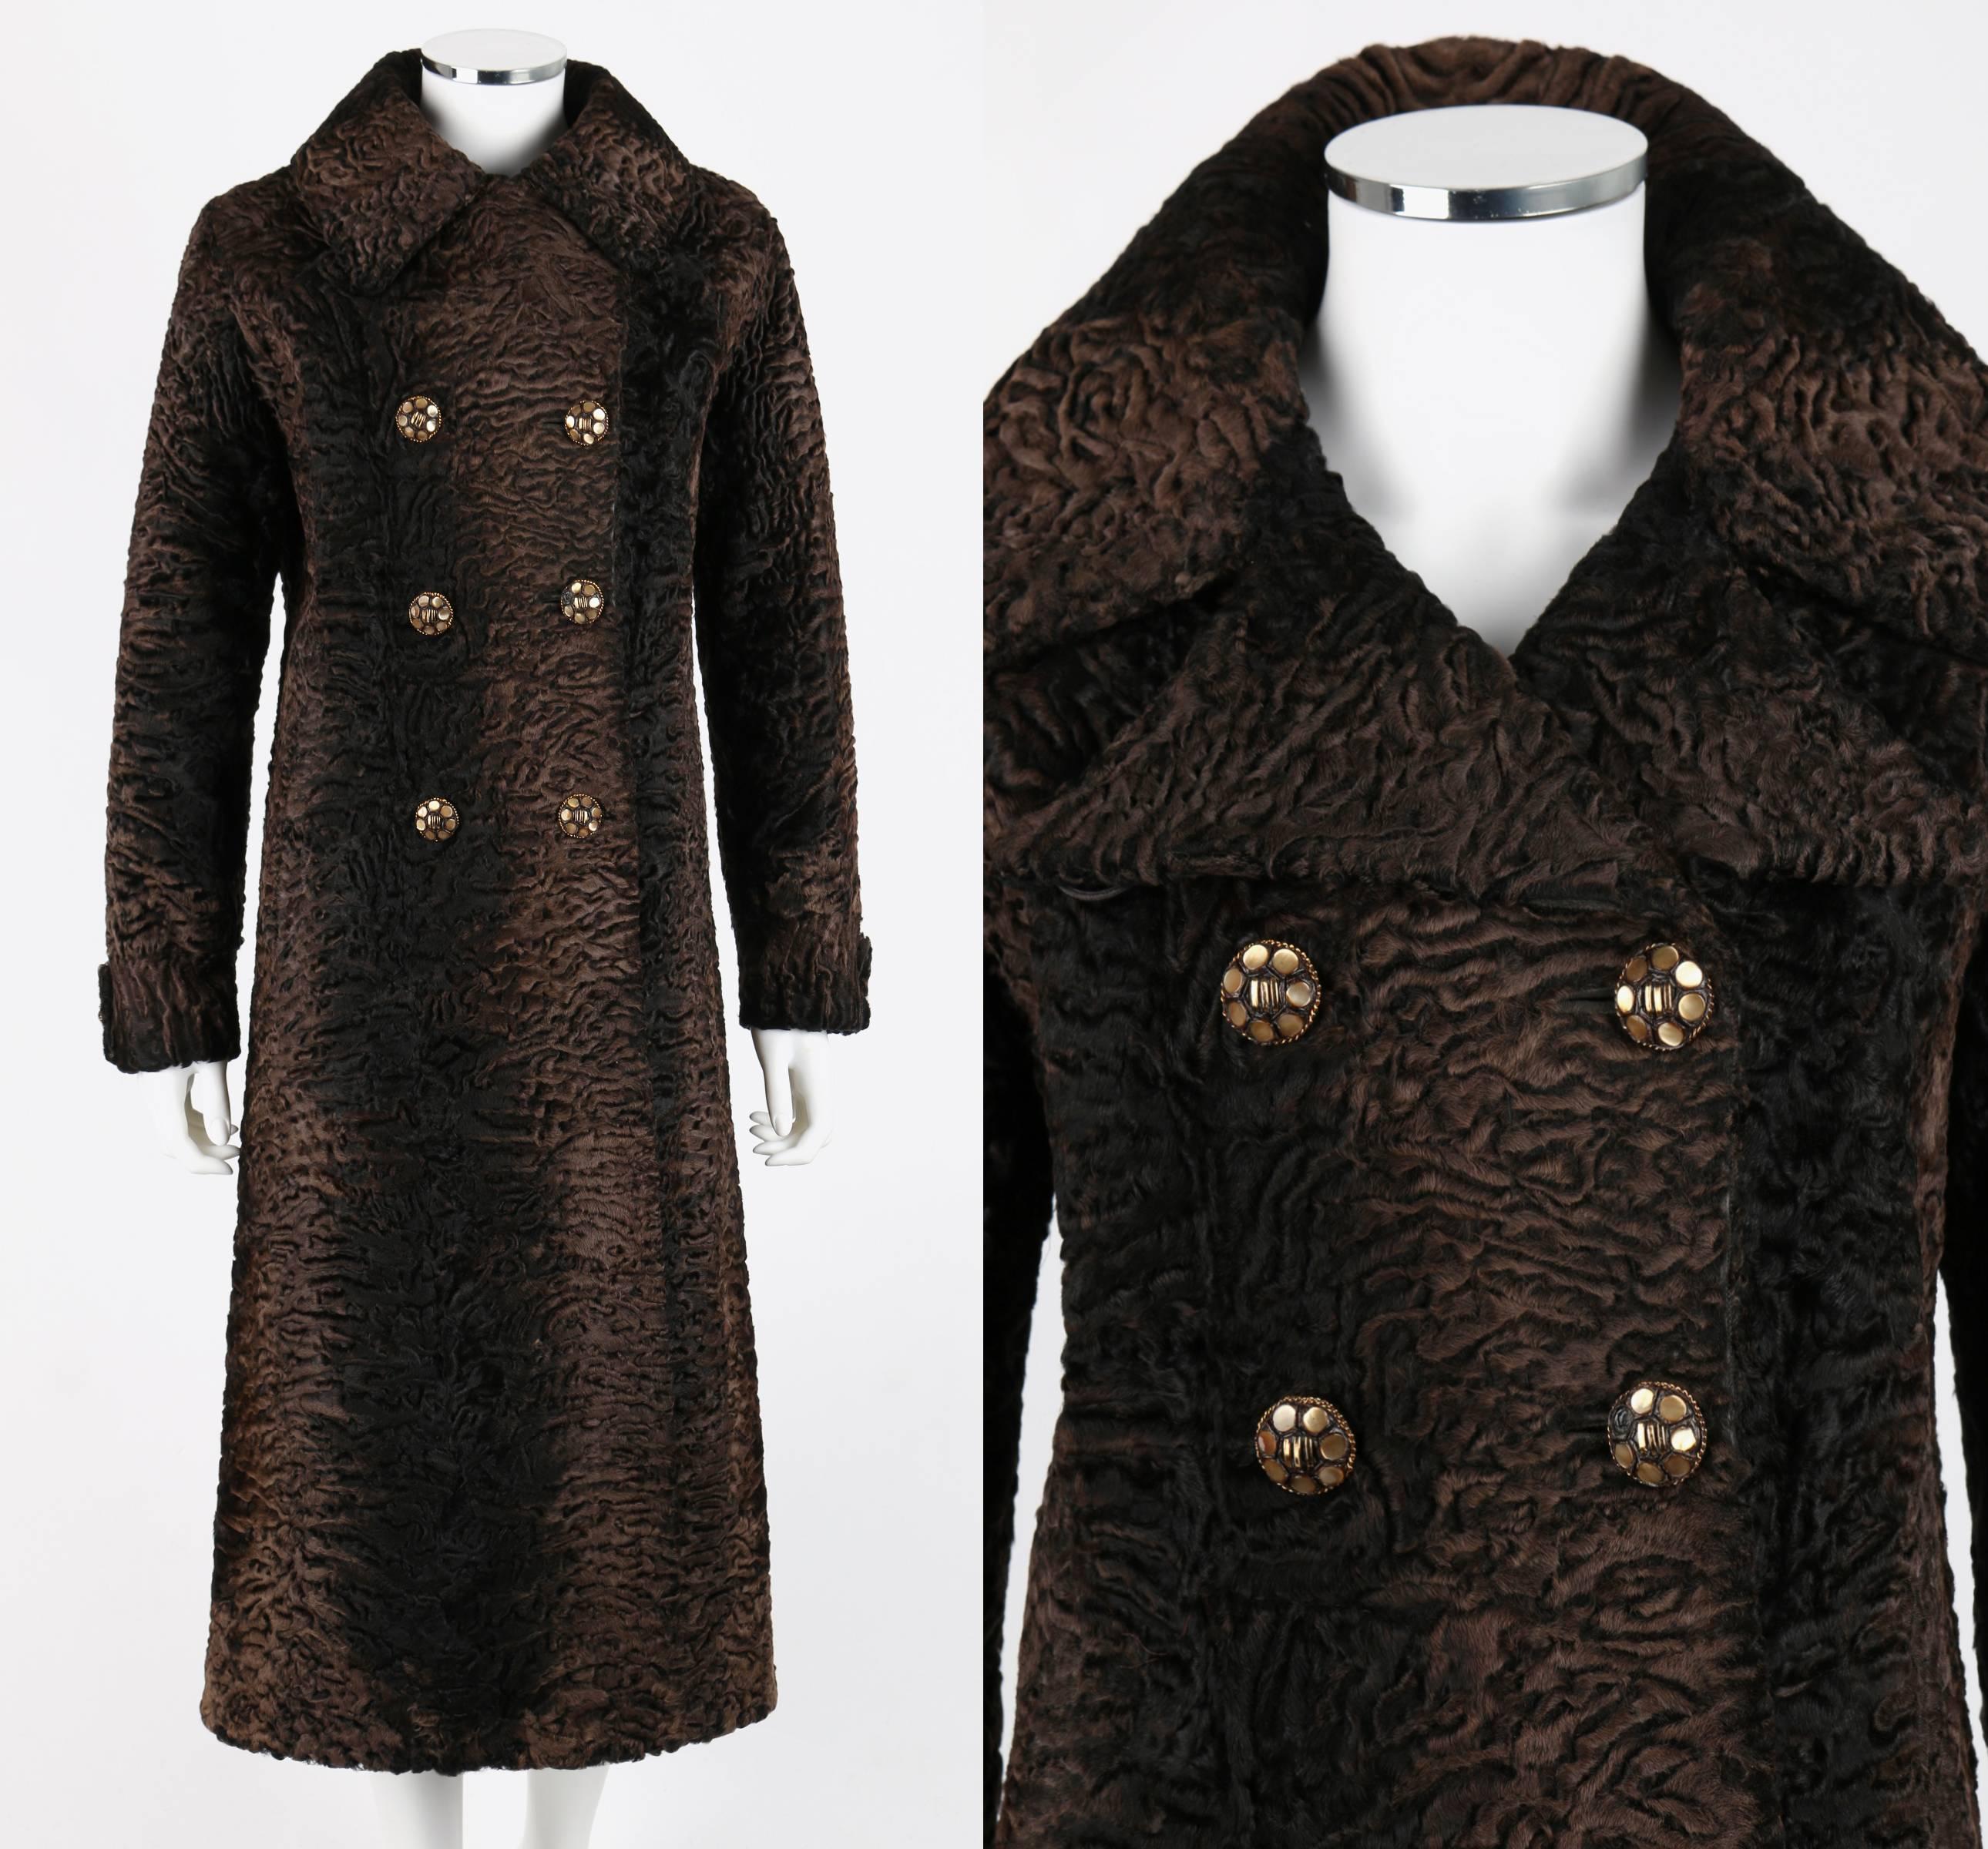 HISTORICAL: Vintage Reckmeyer's Milwaukee genuine Persian lamb fur coat custom made for Mrs. Edmund Fitzgerald, wife of the famed ship's namesake, in 1974 just one year before the sinking of the ship. Label located on inside of coat dates to May